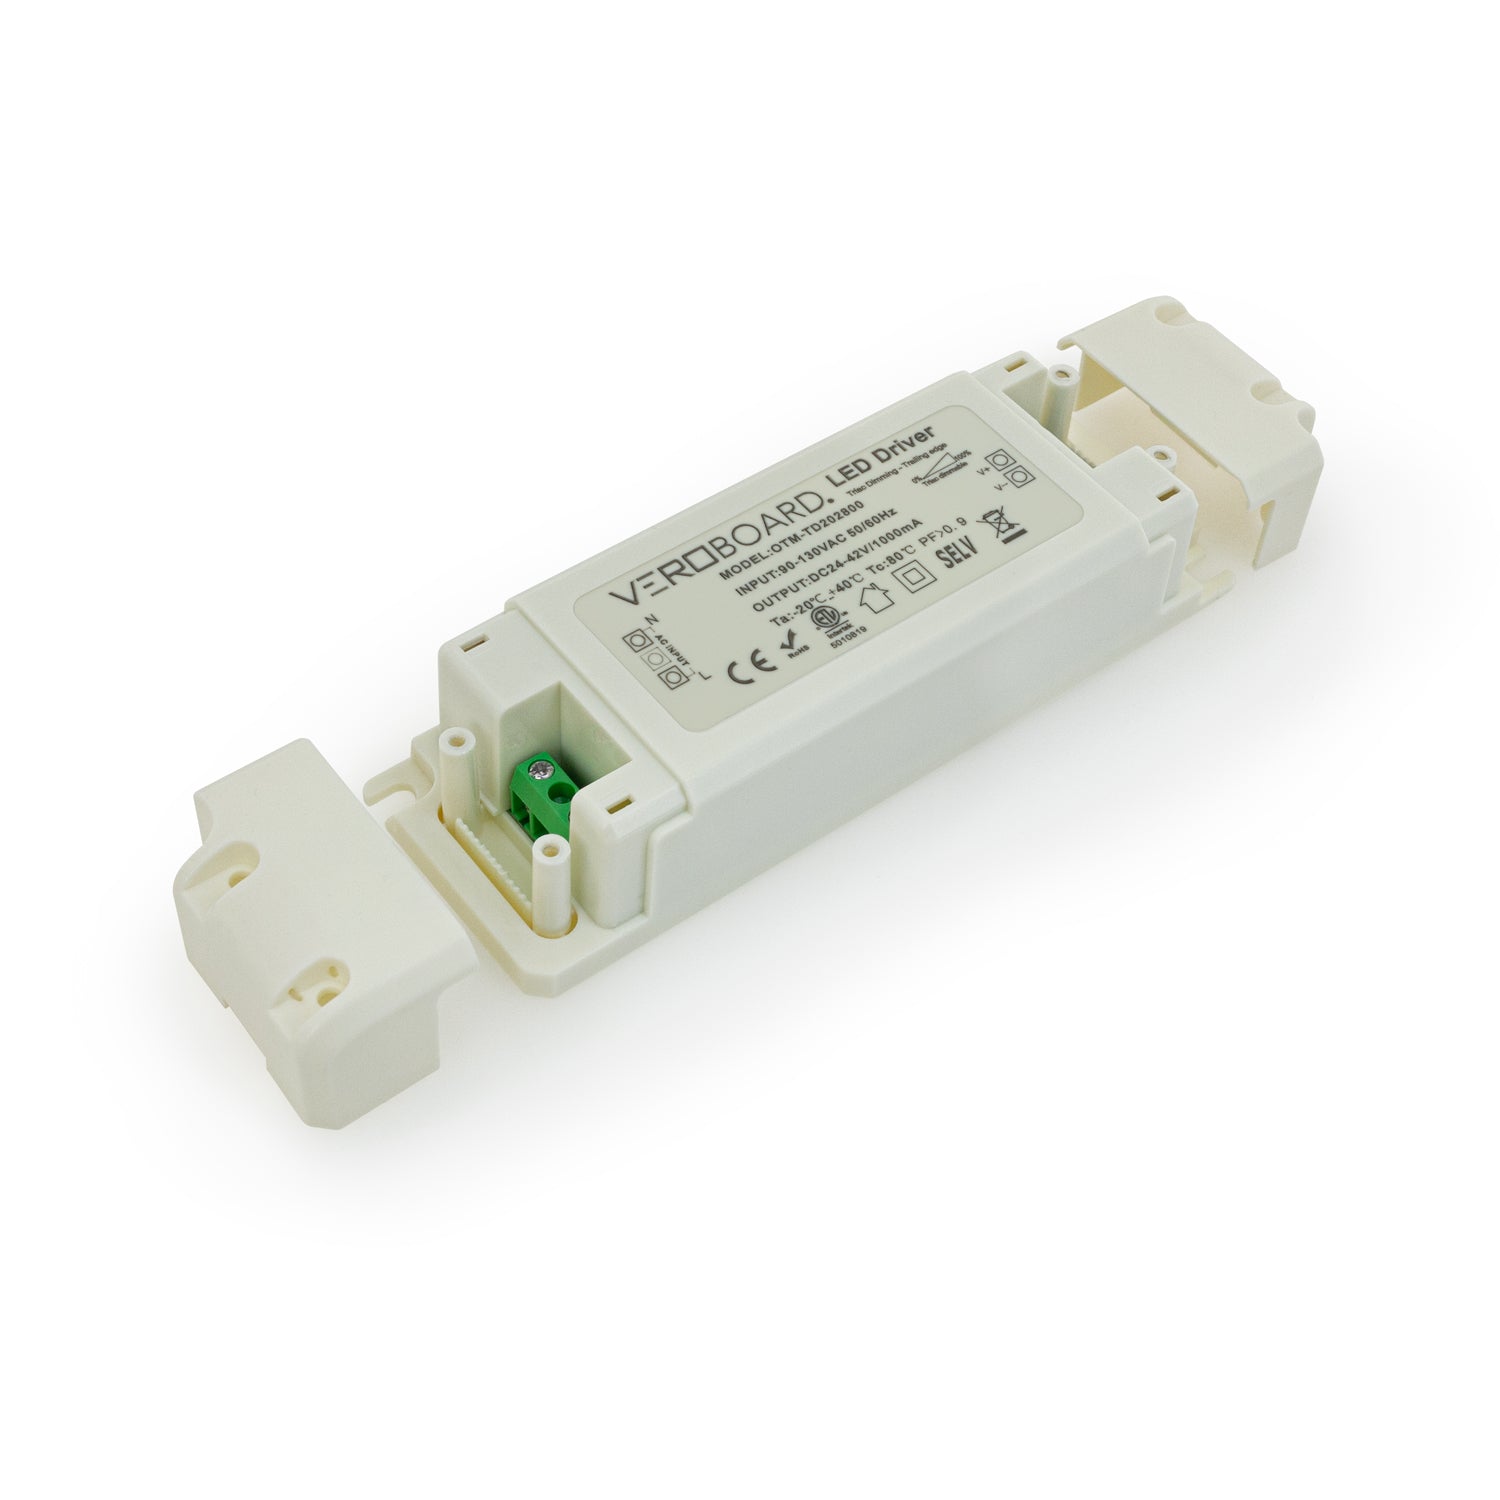 Constant Current 1000ma 24-42V 28W Dimmable OTM-TD202800-1000-28, Veroboard